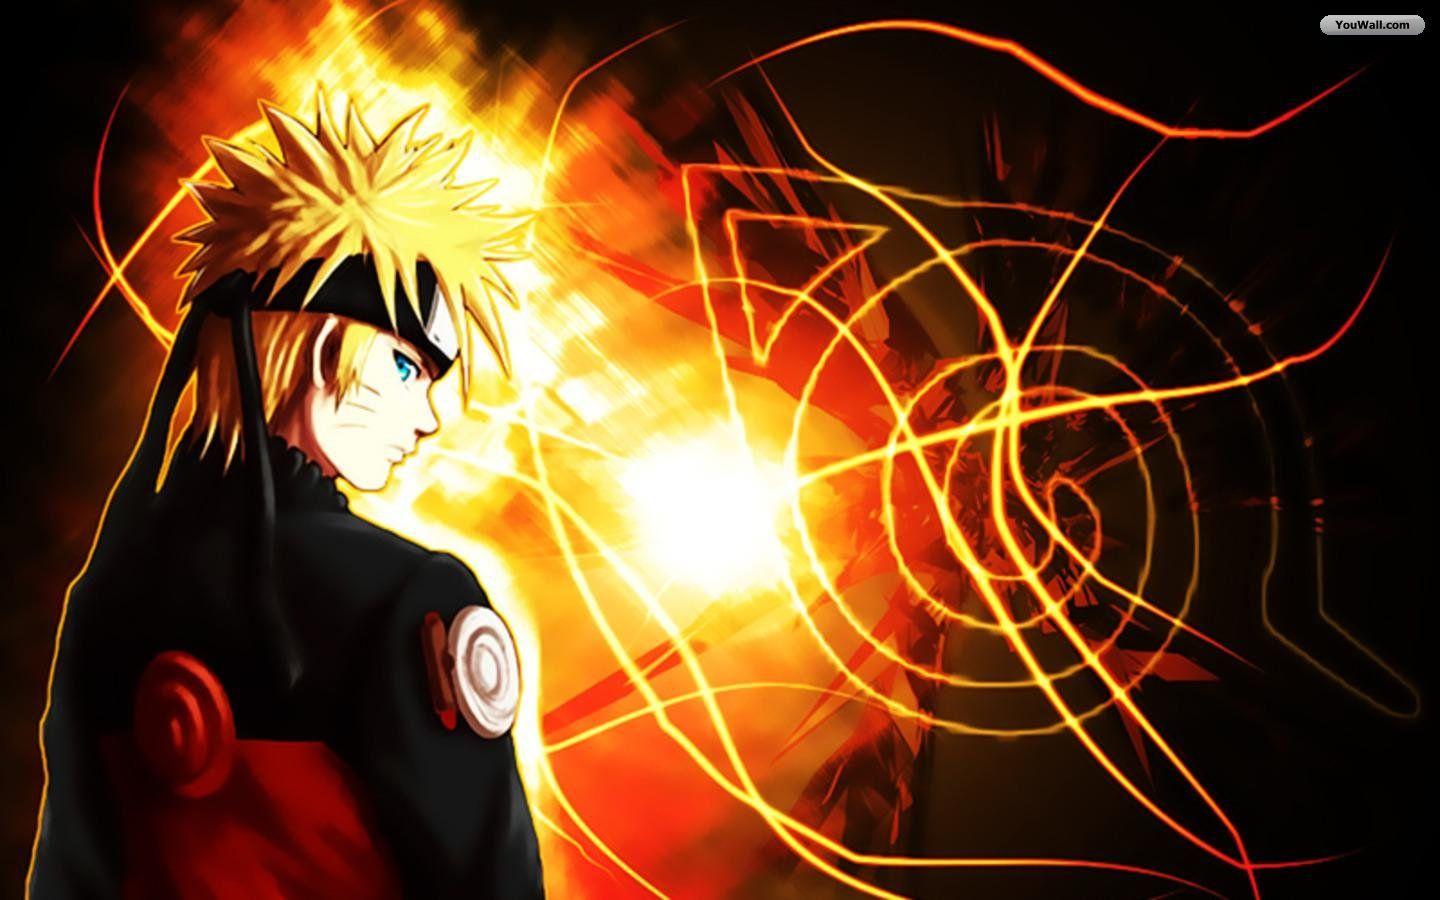 Naruto HD, 1440x900 px for PC & Mac, Laptop, Tablet, Mobile Phone